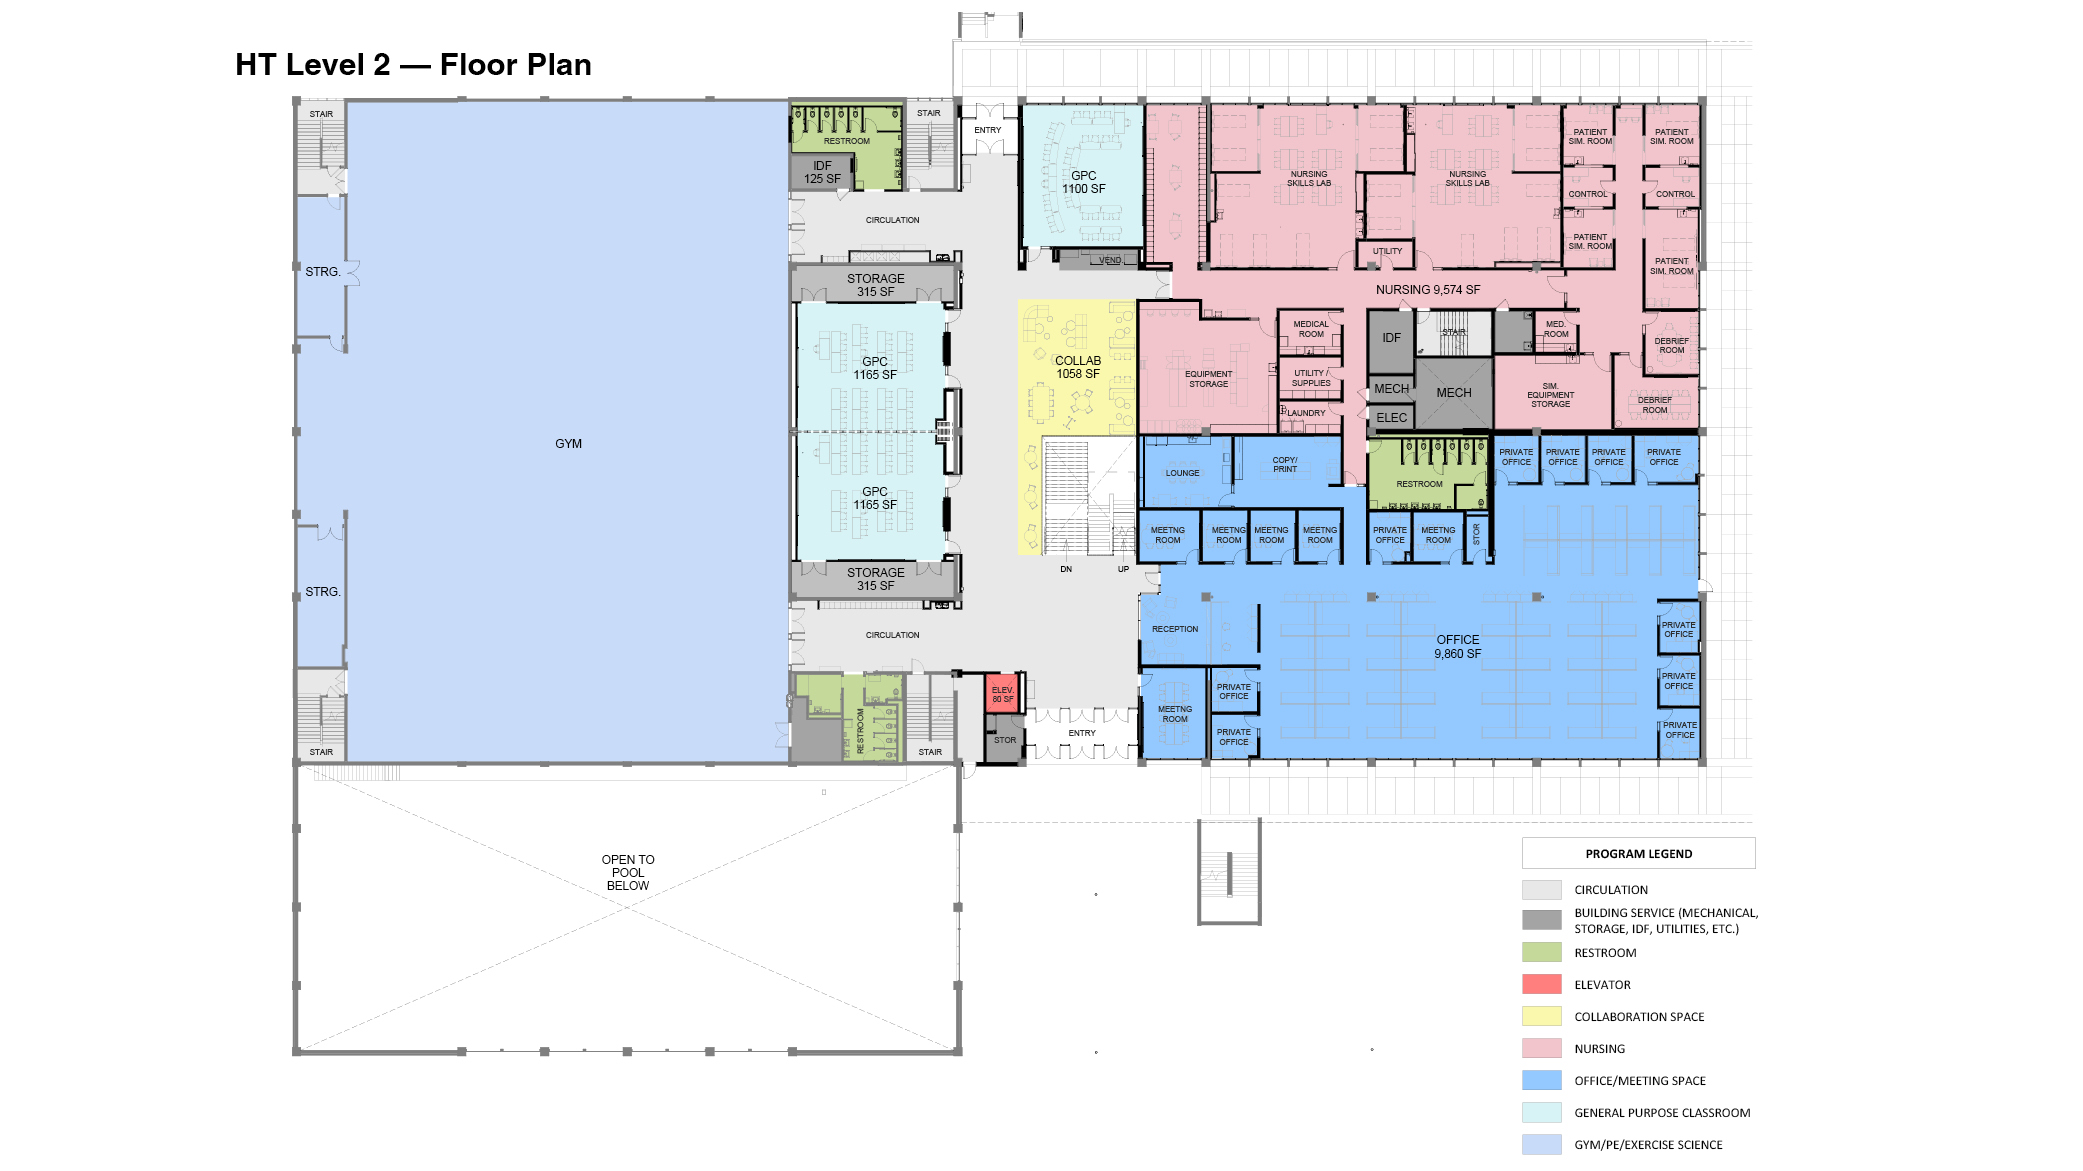 HT Level 2 floor plan, showing areas for existing gym, and new areas for consolidated academic offices, general purpose classrooms, collaboration areas, Nursing teaching areas and labs, all-user restrooms and elevator